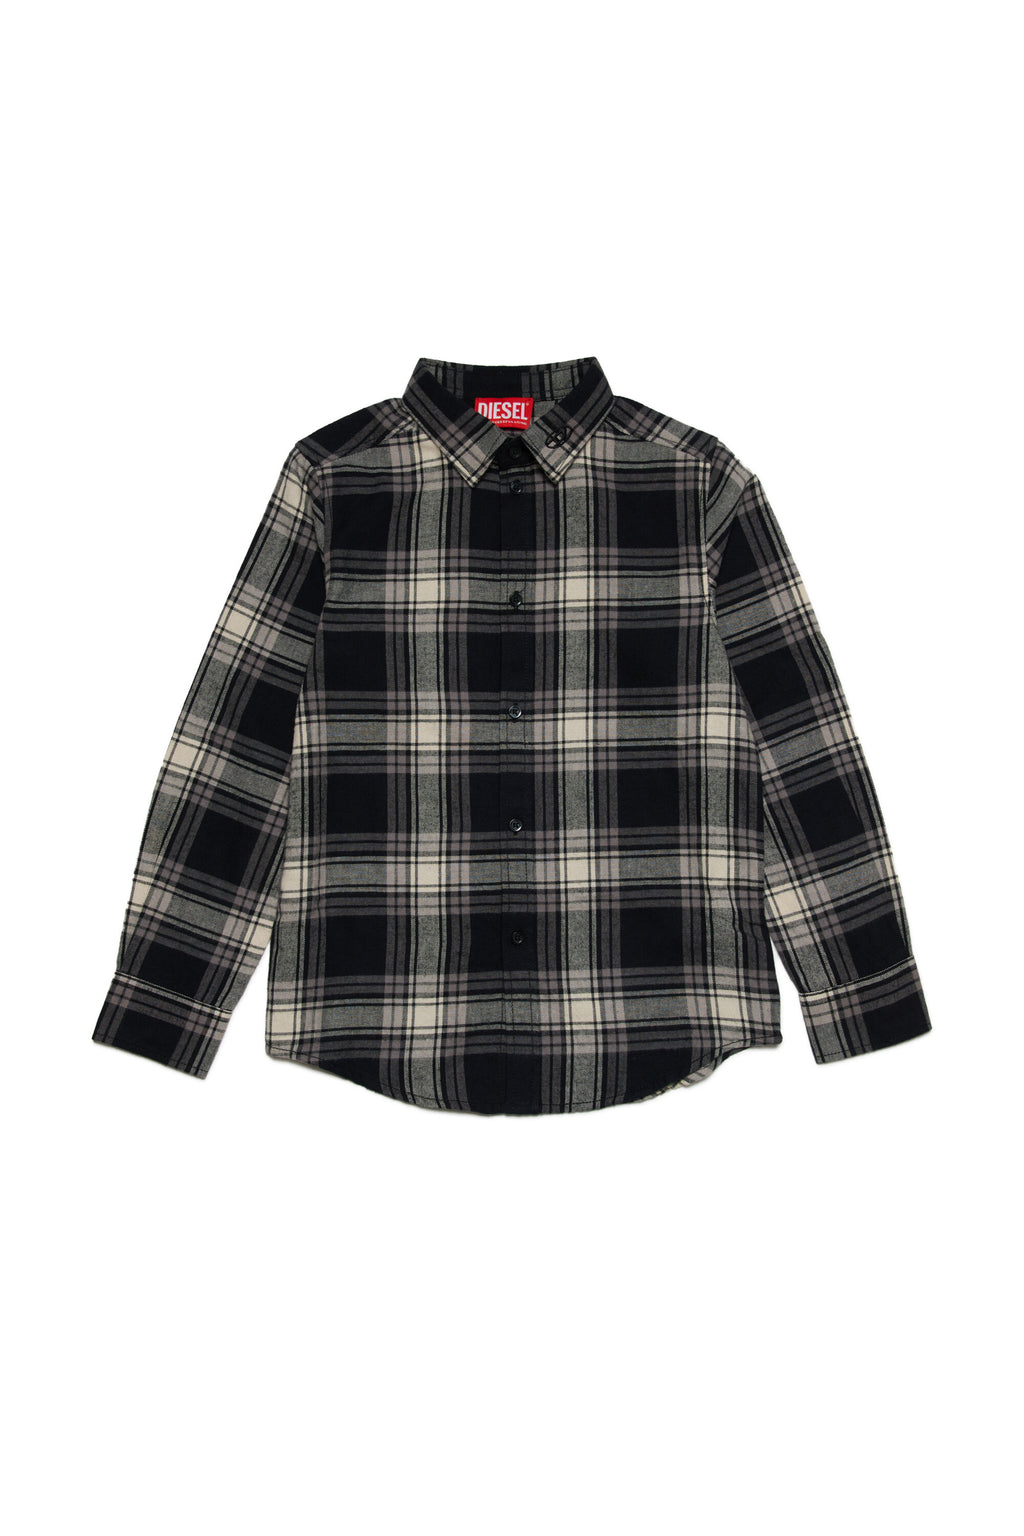 Plaid flannel shirt with Oval D logo